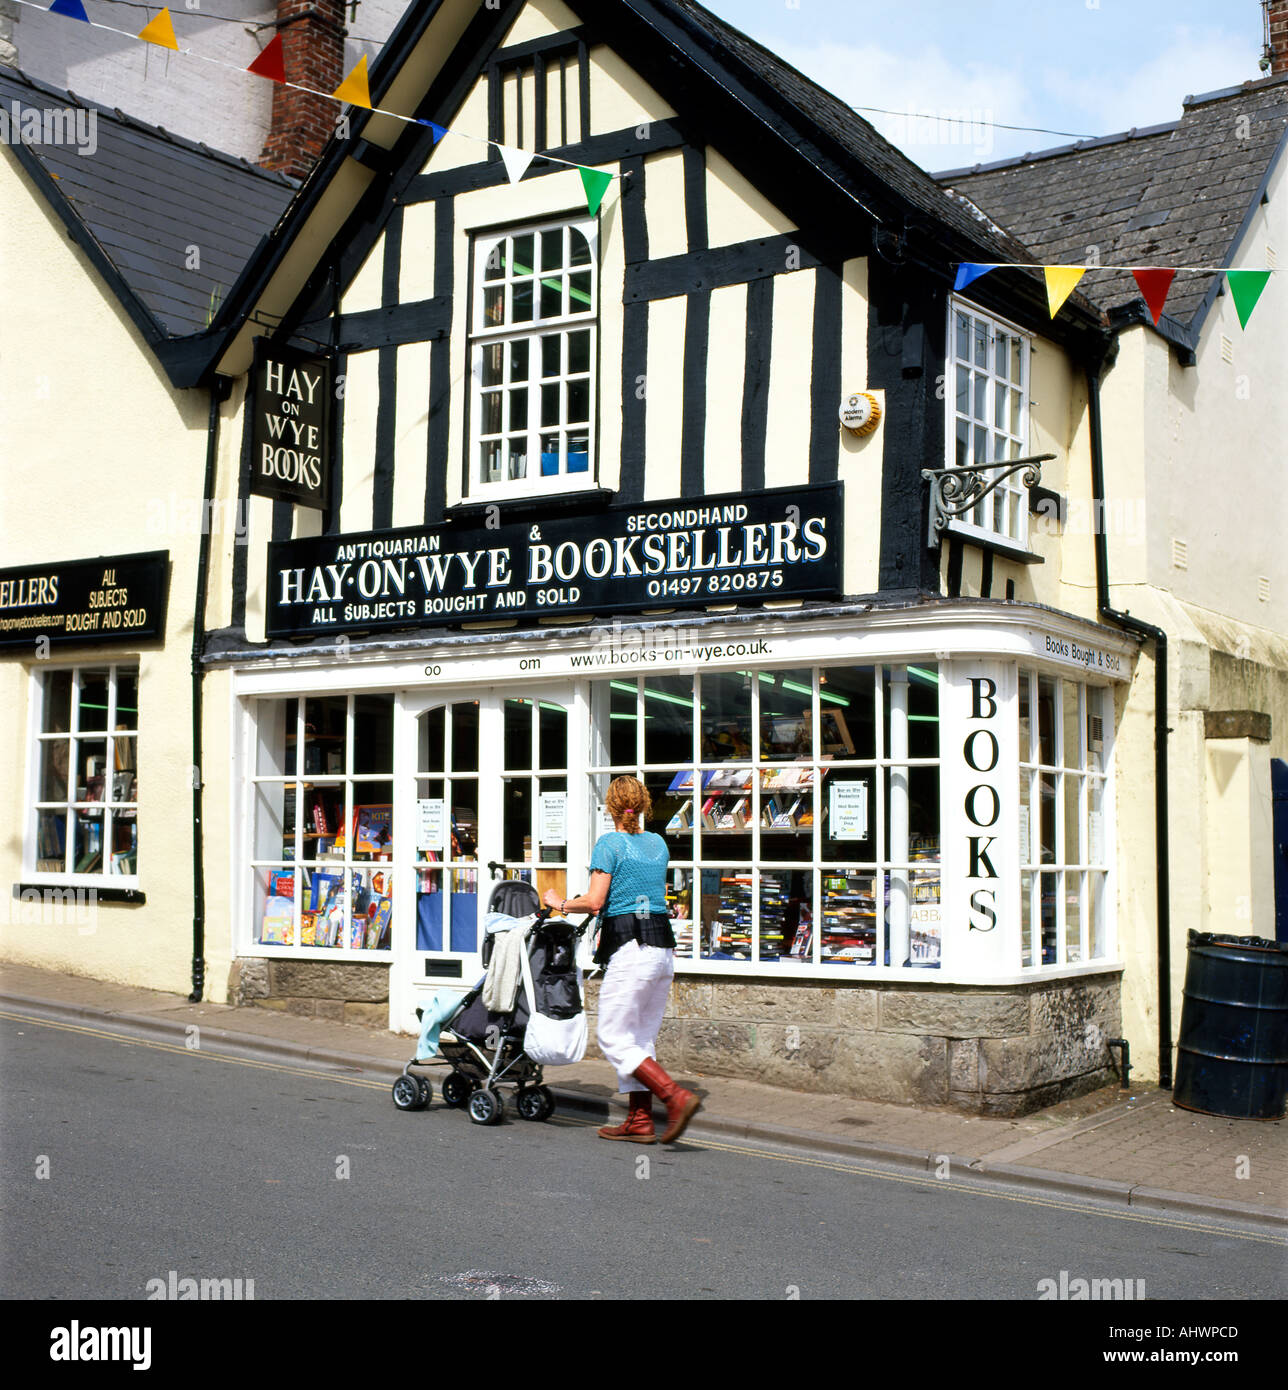 A woman with red boots and a pushchair buggy walking past Hay on Wye Booksellers shop selling books book town Wales UK Great Britain   KATHY DEWITT Stock Photo